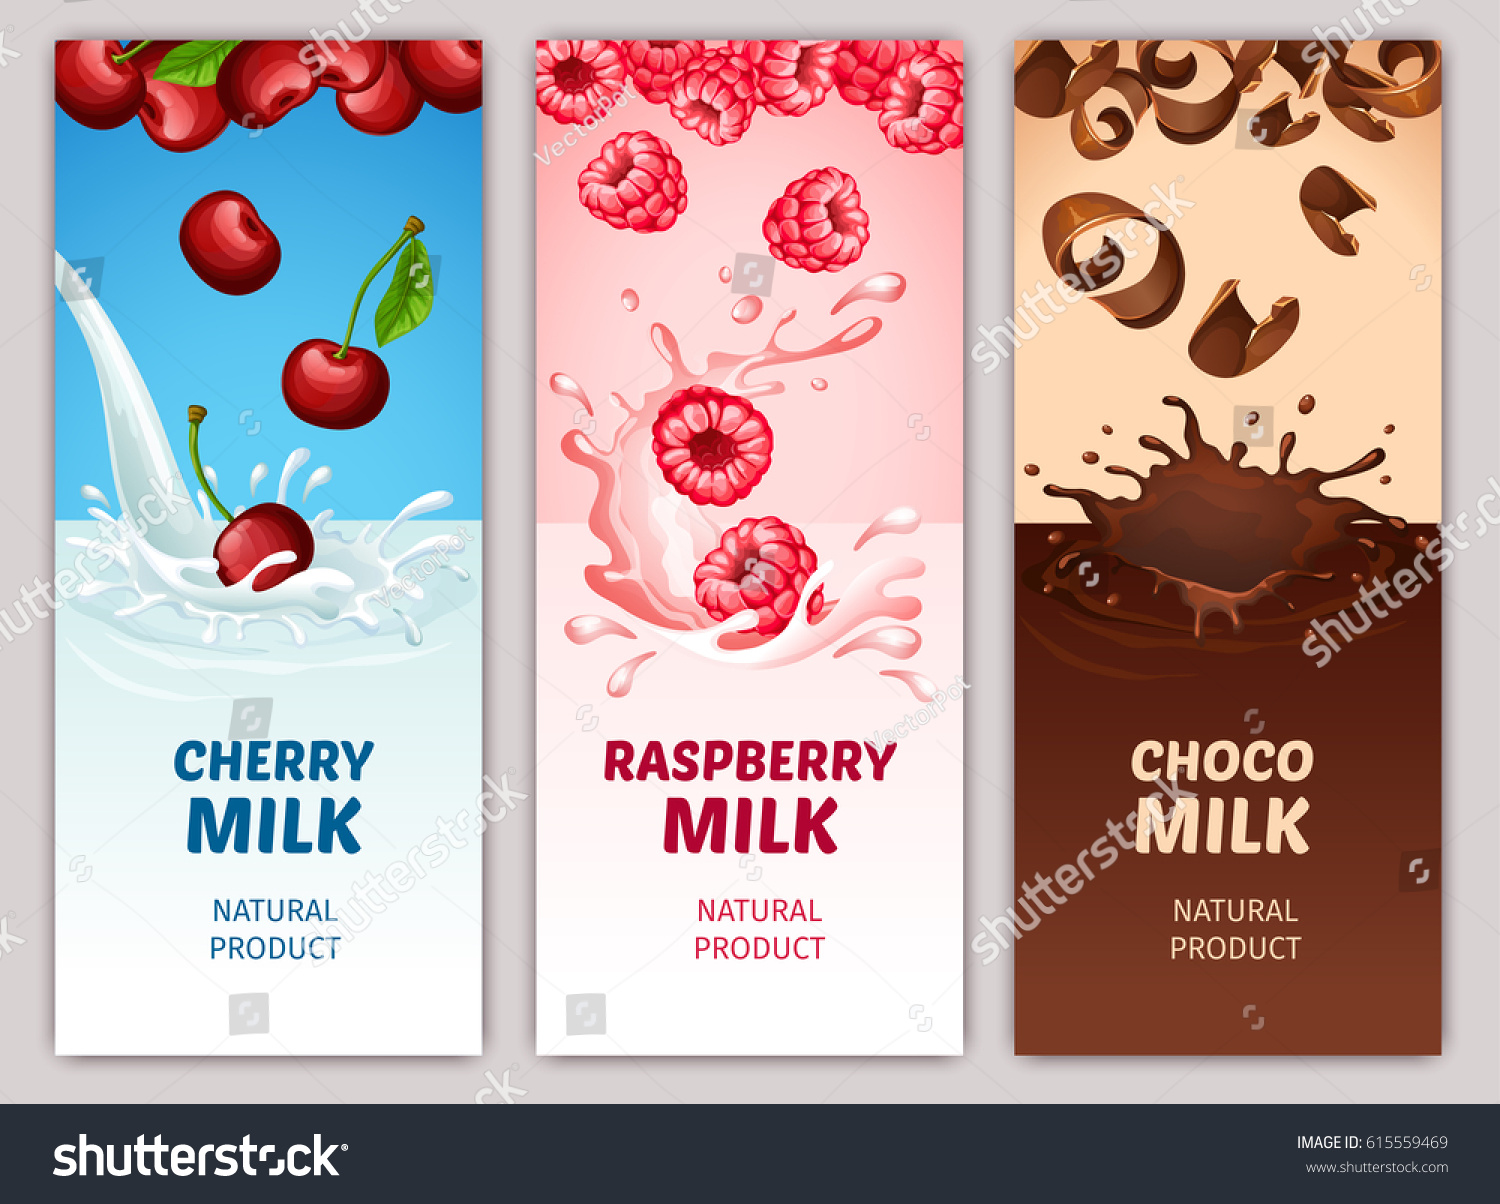 Cartoon dairy products vertical banners with cherry raspberry and chocolate shavings falling into milk splashes vector illustration #615559469